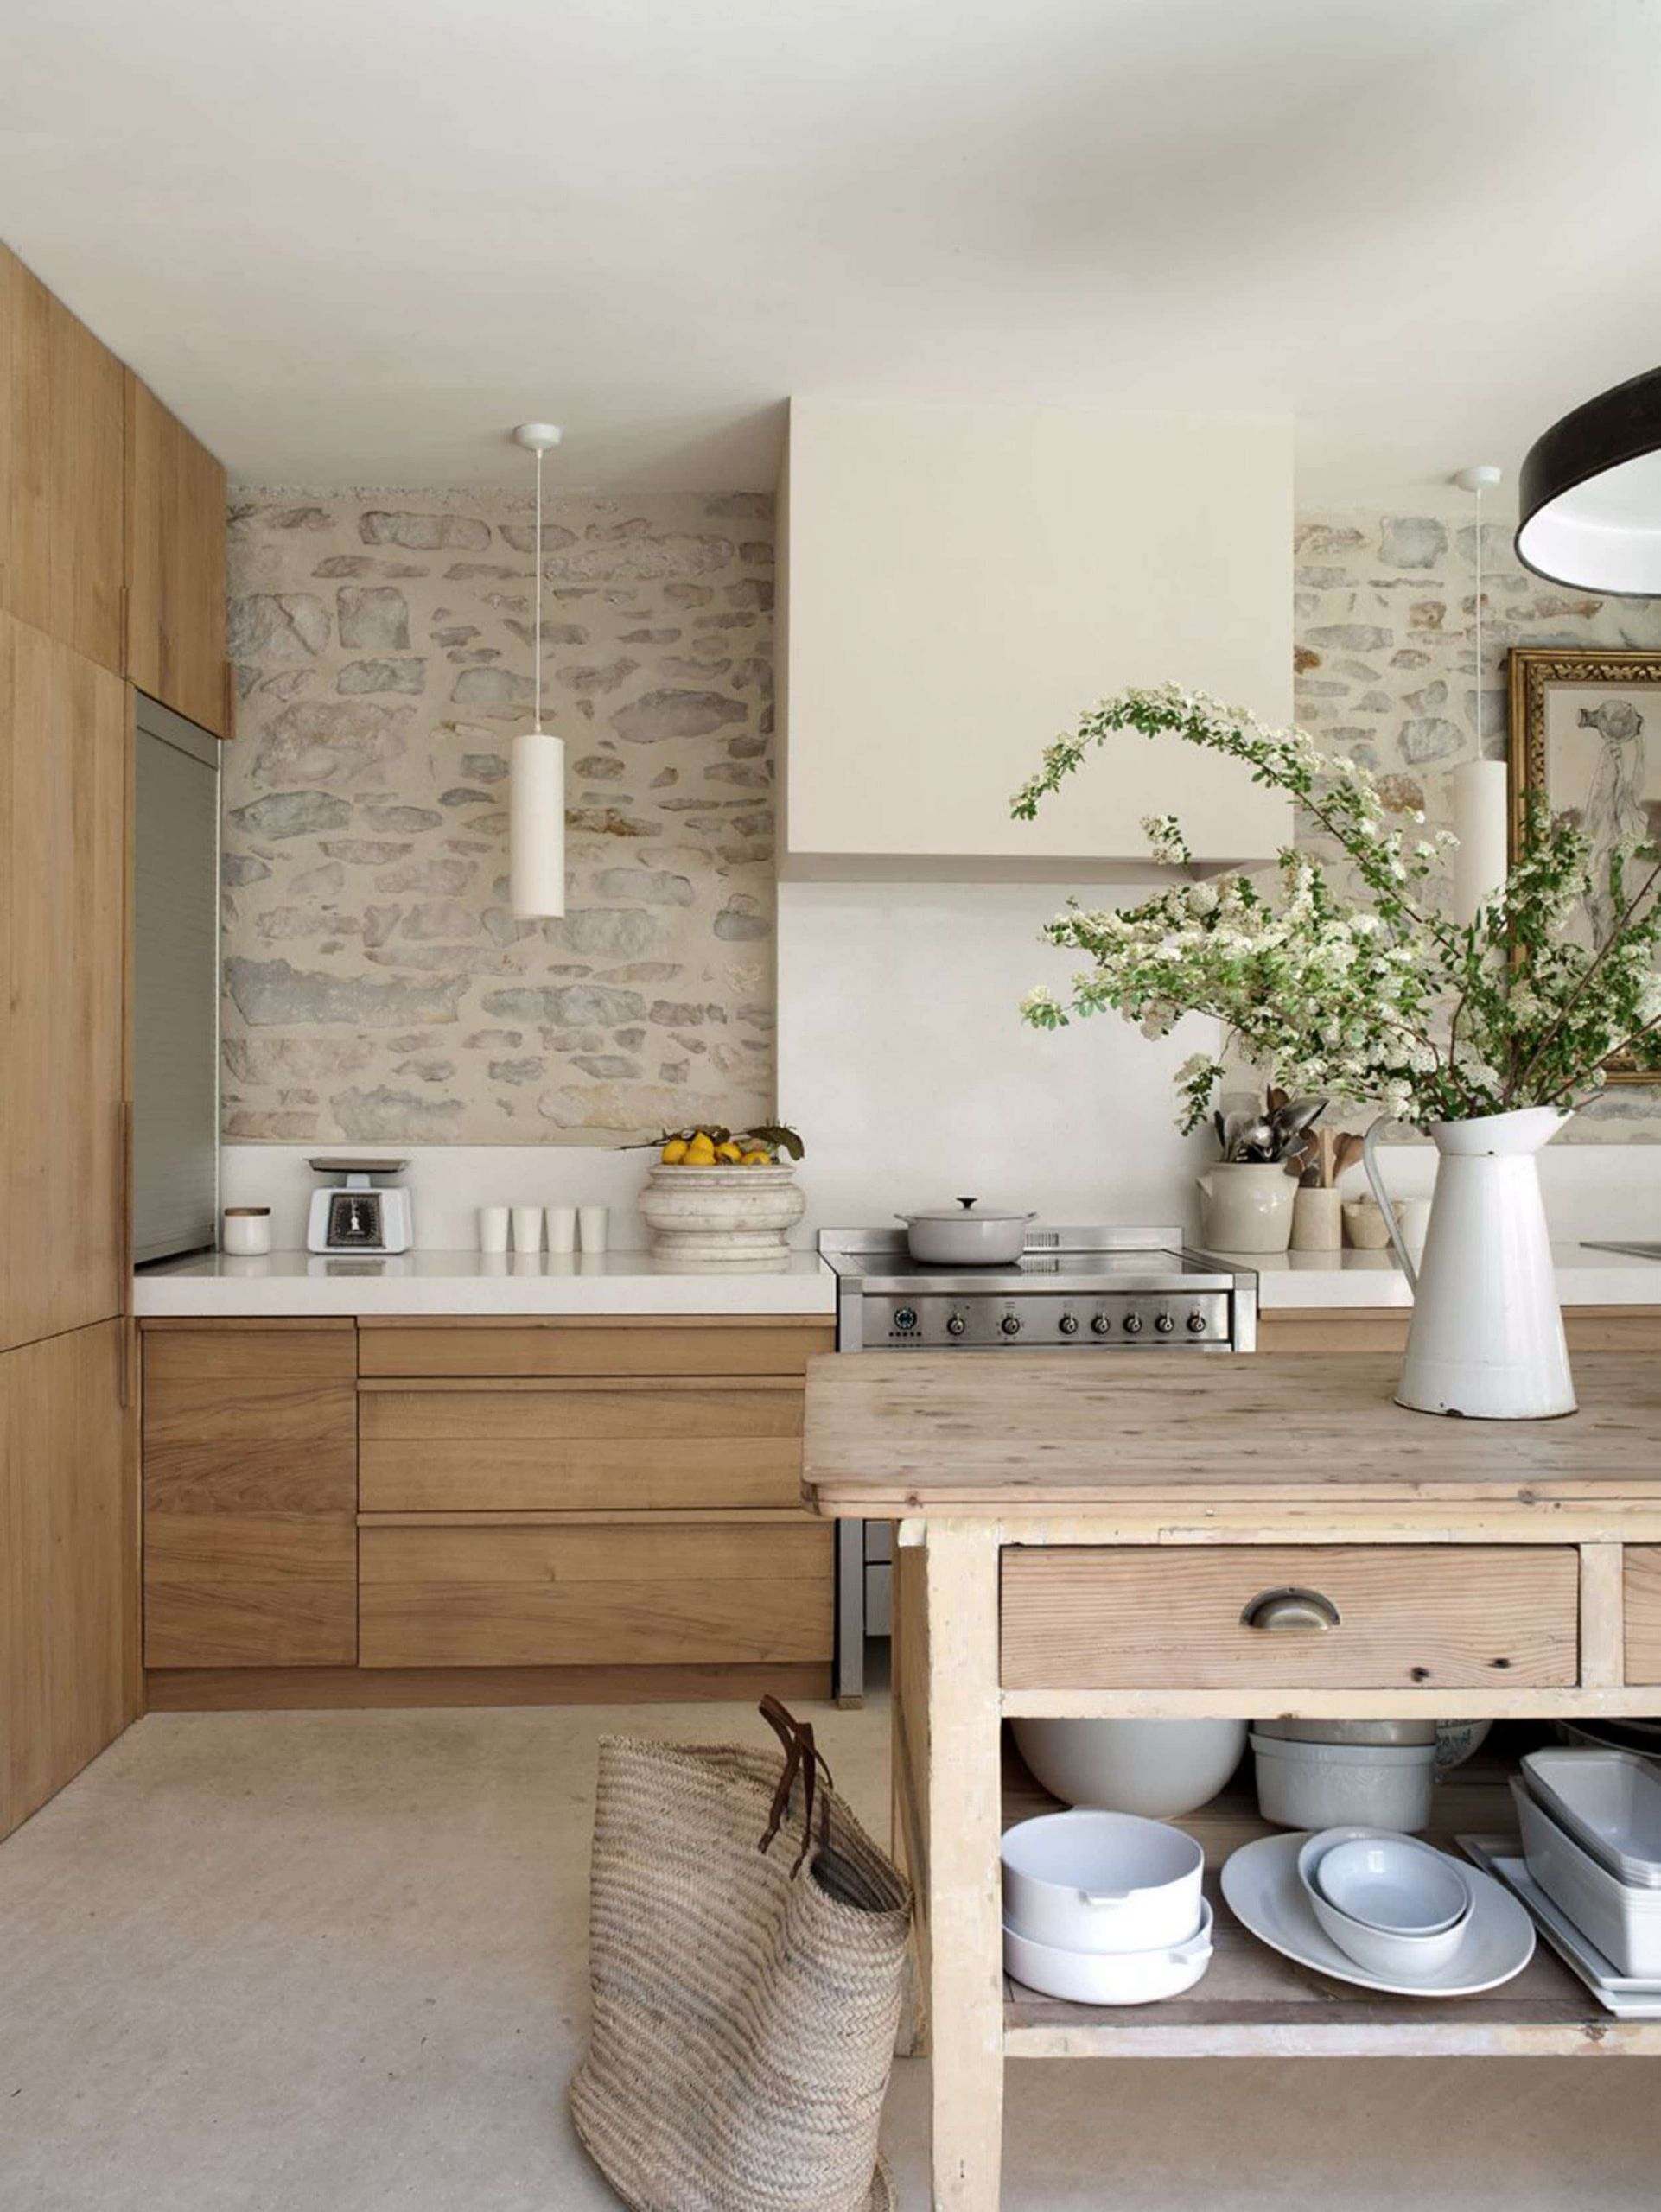 2020 Kitchen Backsplash Luxury the 9 Kitchen Trends We Can T Wait to See More Of In 2020